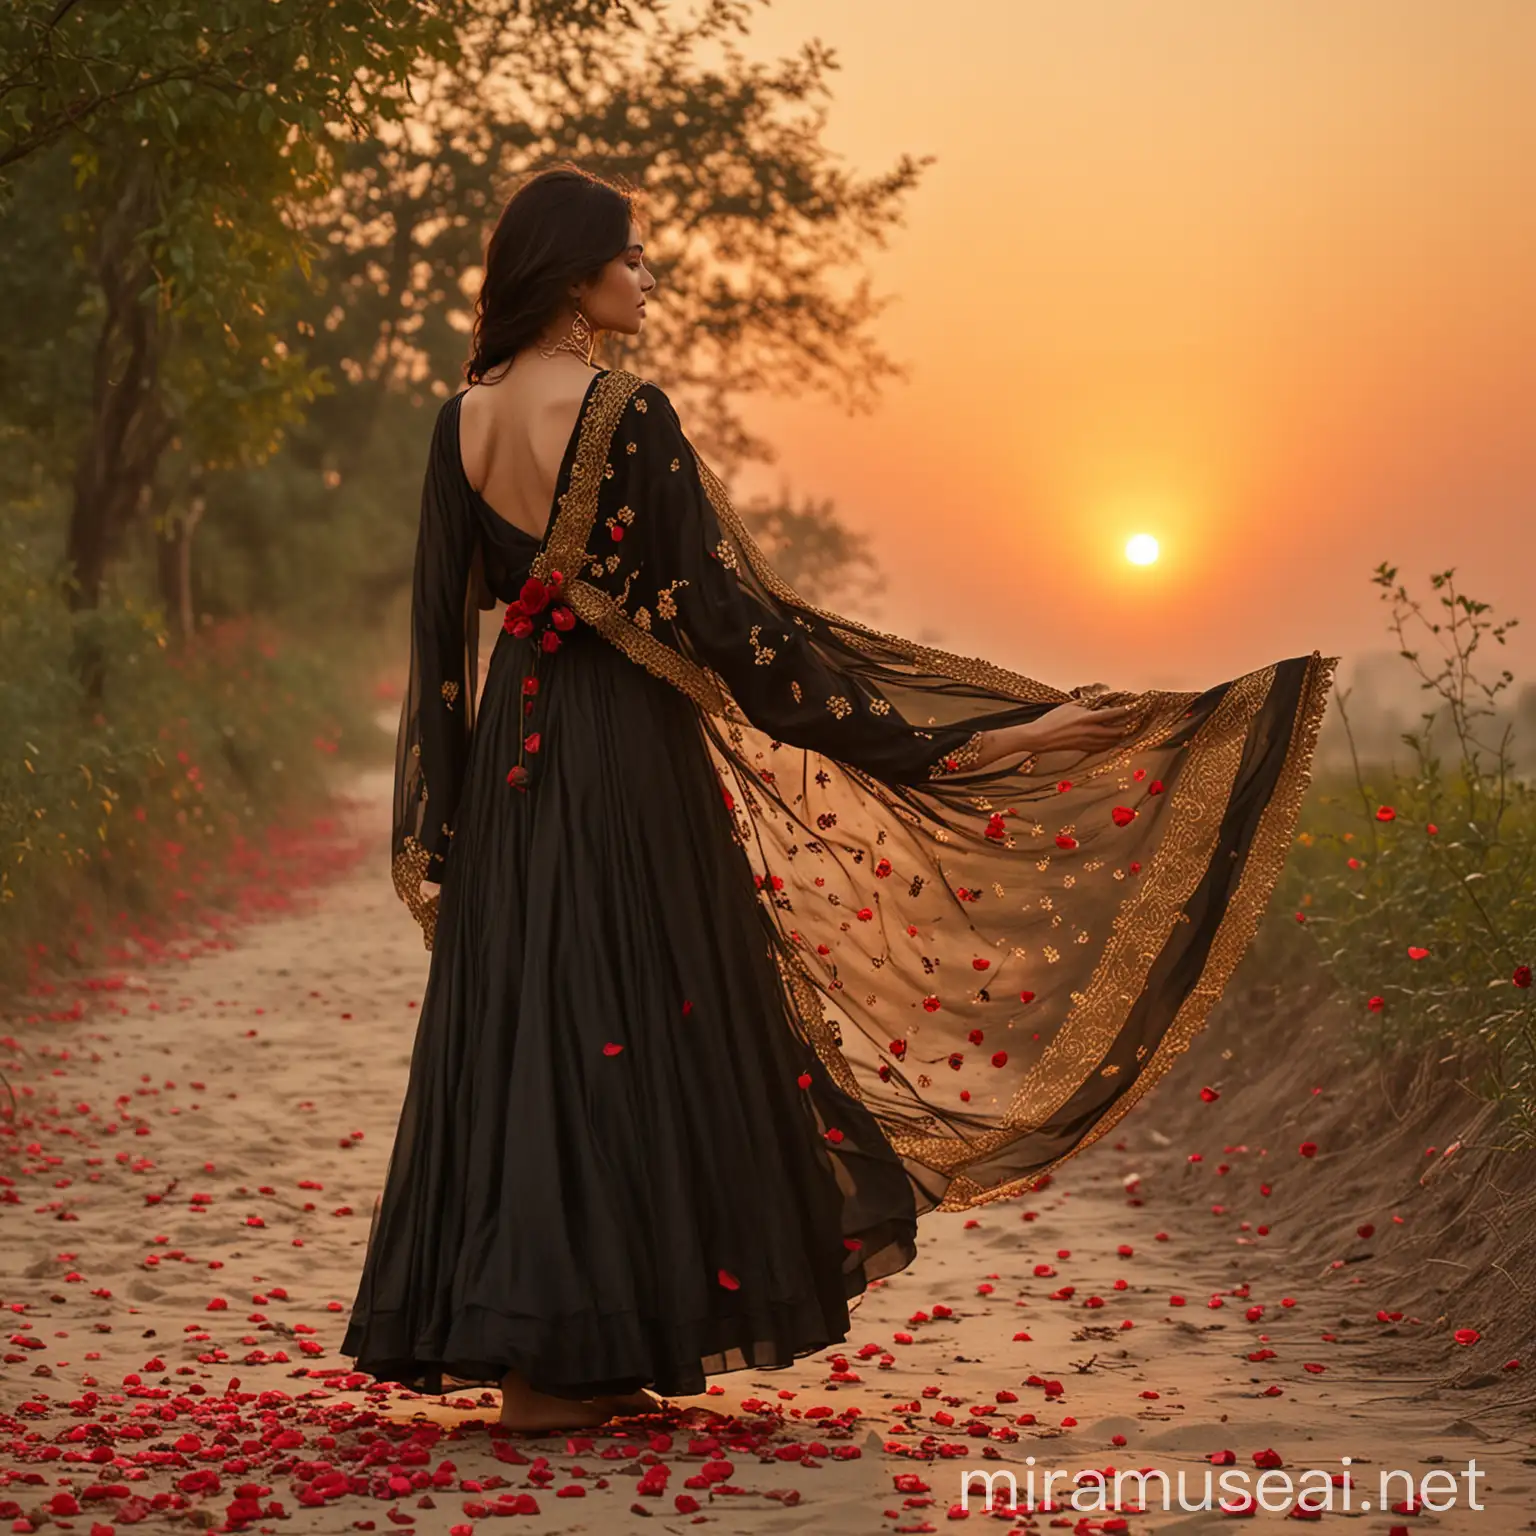 A woman stands gracefully under a soft, golden sunset, wearing a flowing black dupatta adorned with a single, vivid red rose. As a gentle breeze dances through the air, delicate rose petals begin to cascade down, landing softly on her shoulder, each petal adding a touch of ephemeral beauty to the serene scene.